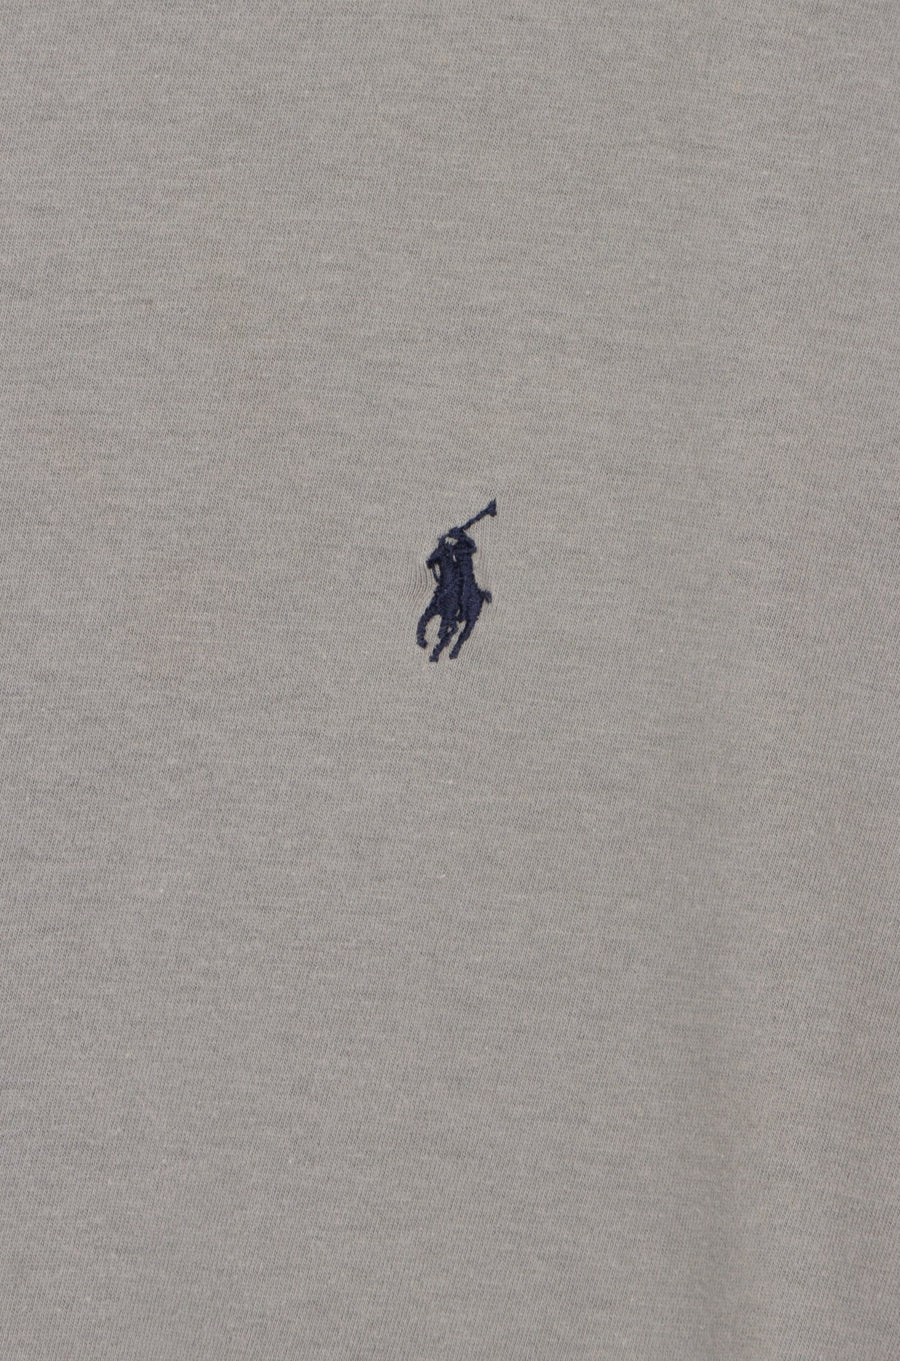 RALPH LAUREN POLO Embroidered Logo Taupe Classic T-Shirt (L-XL)